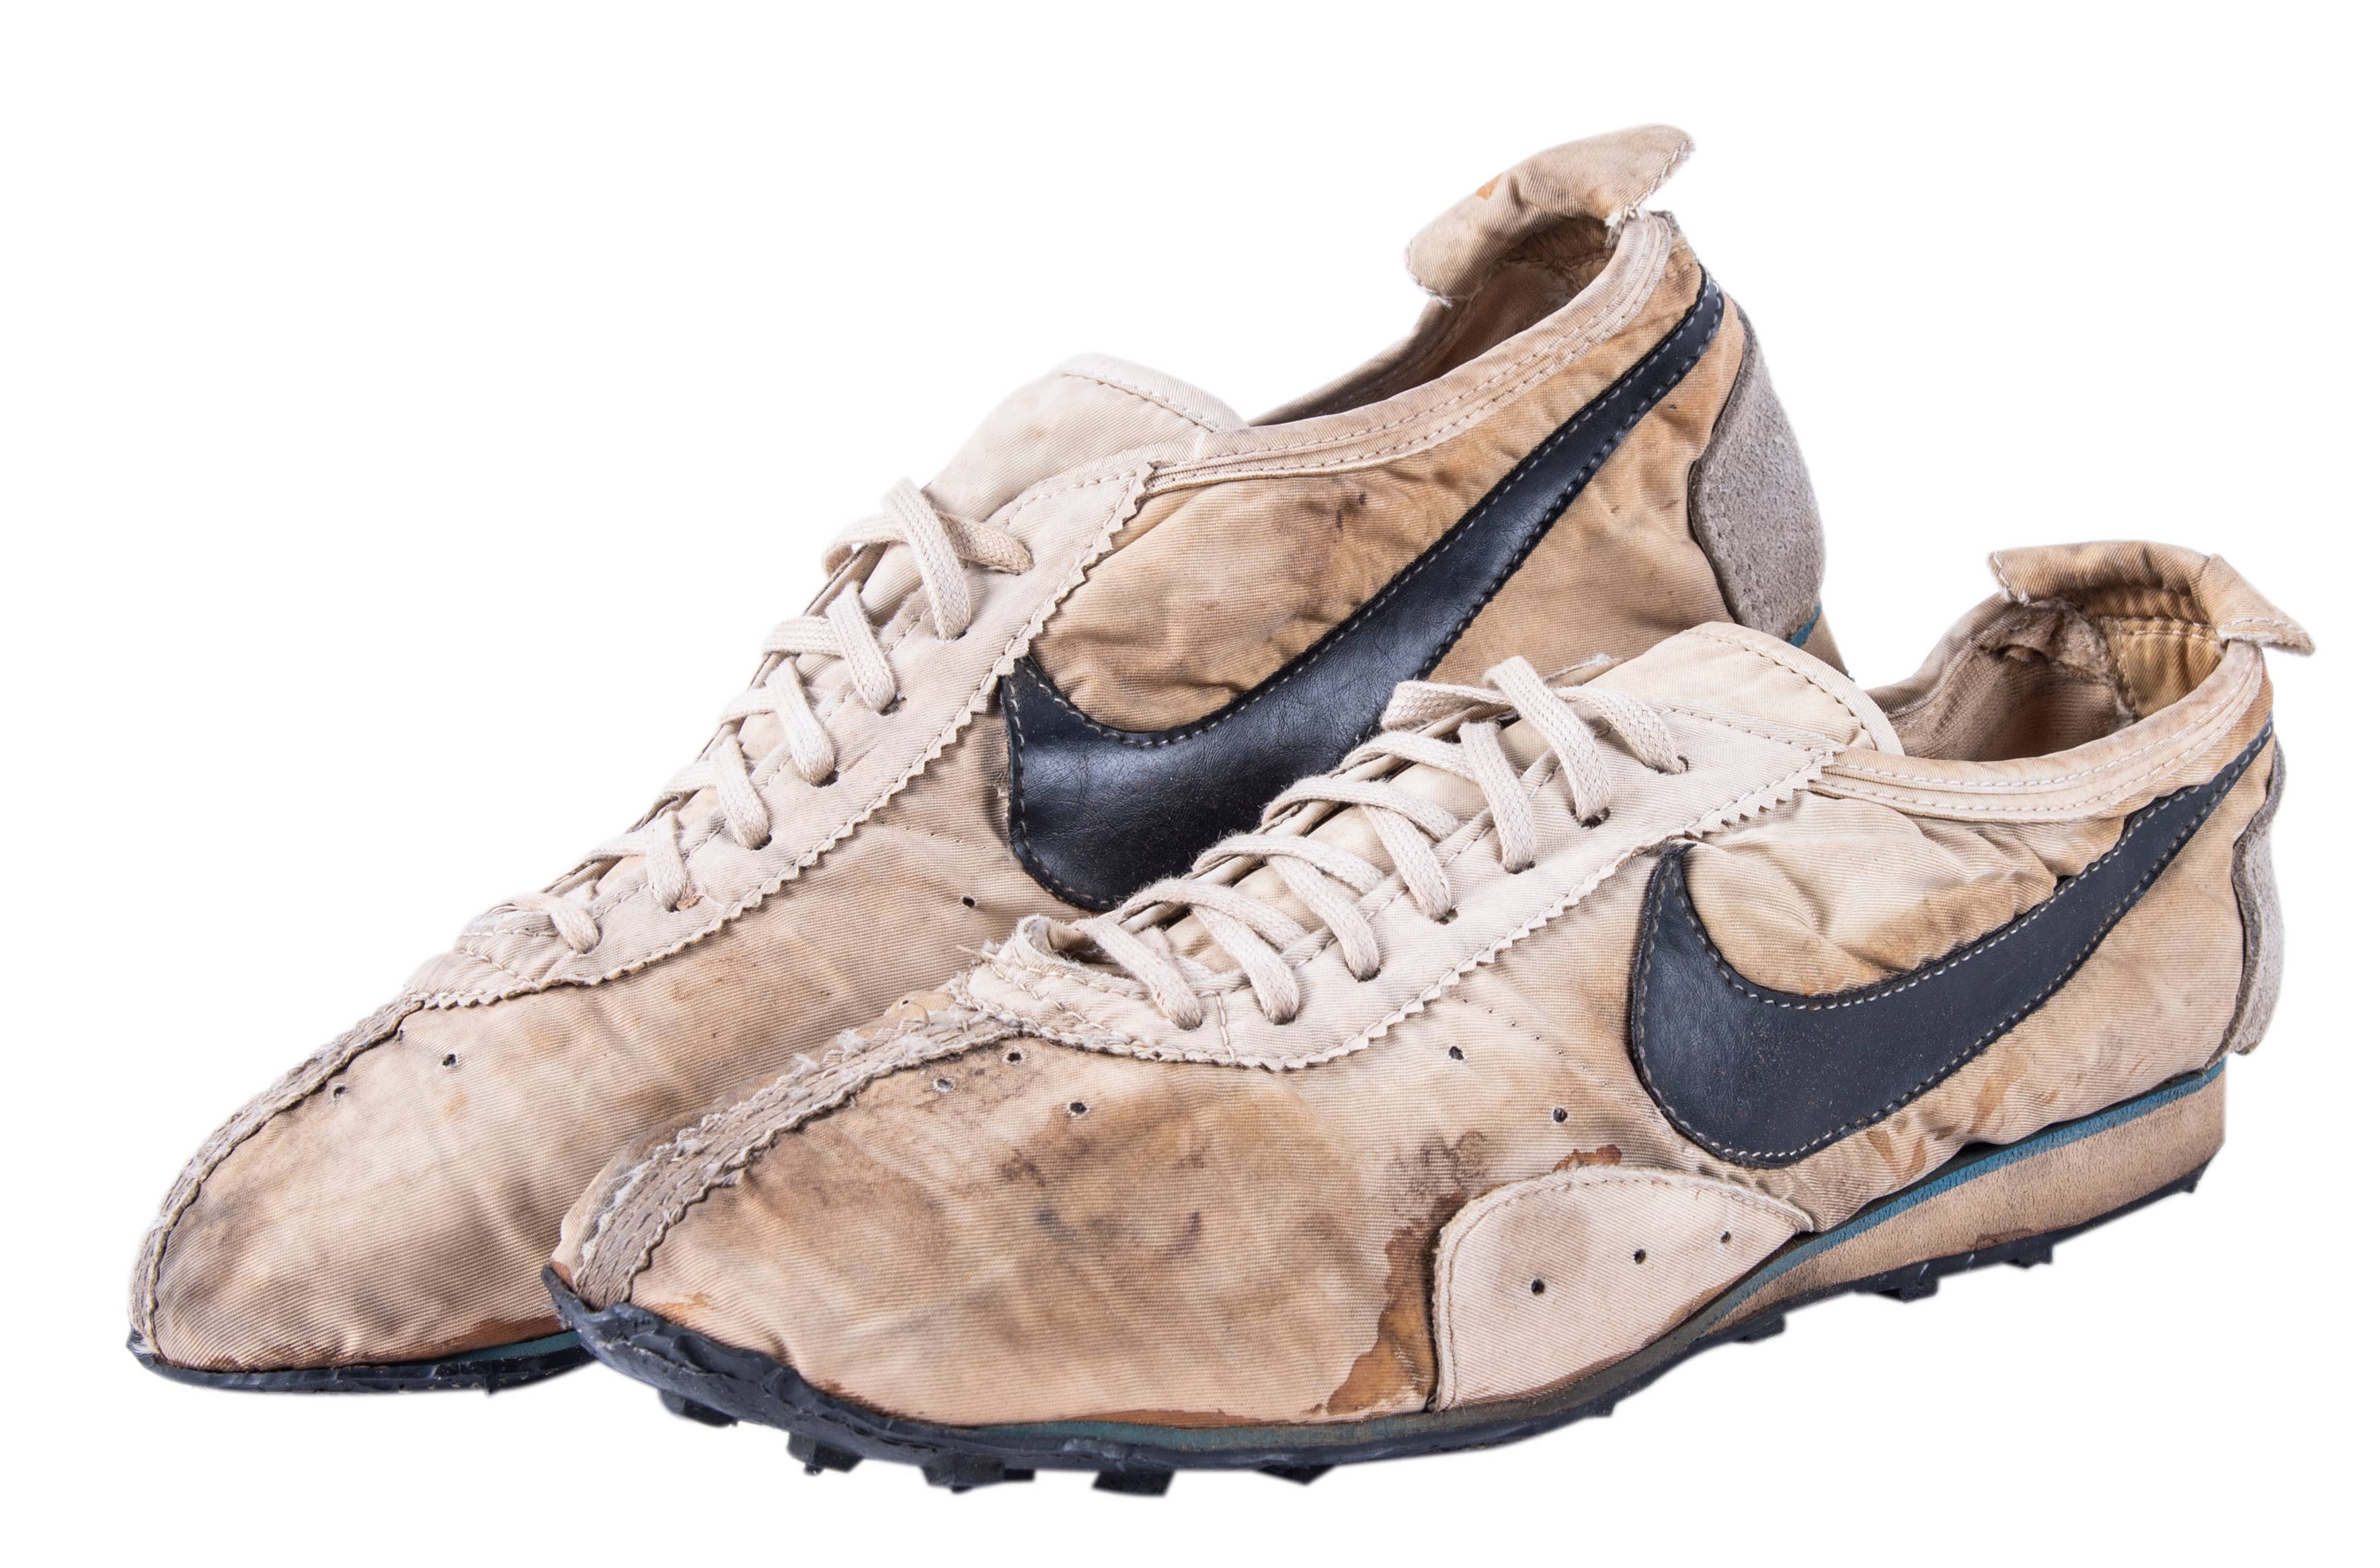 The Ultra Rare Nike Moon Shoe Going Up For Auction | Complex